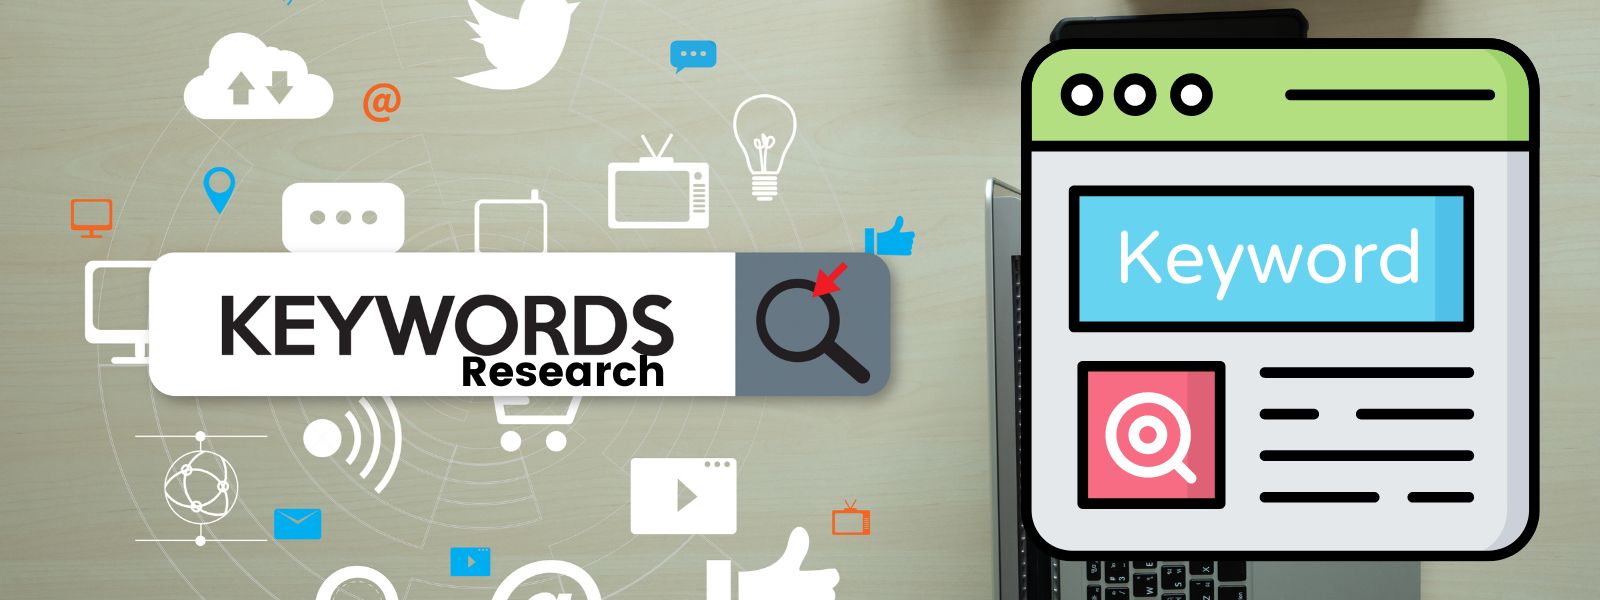 Keyword Research is Important when your writing a relevant blog topic